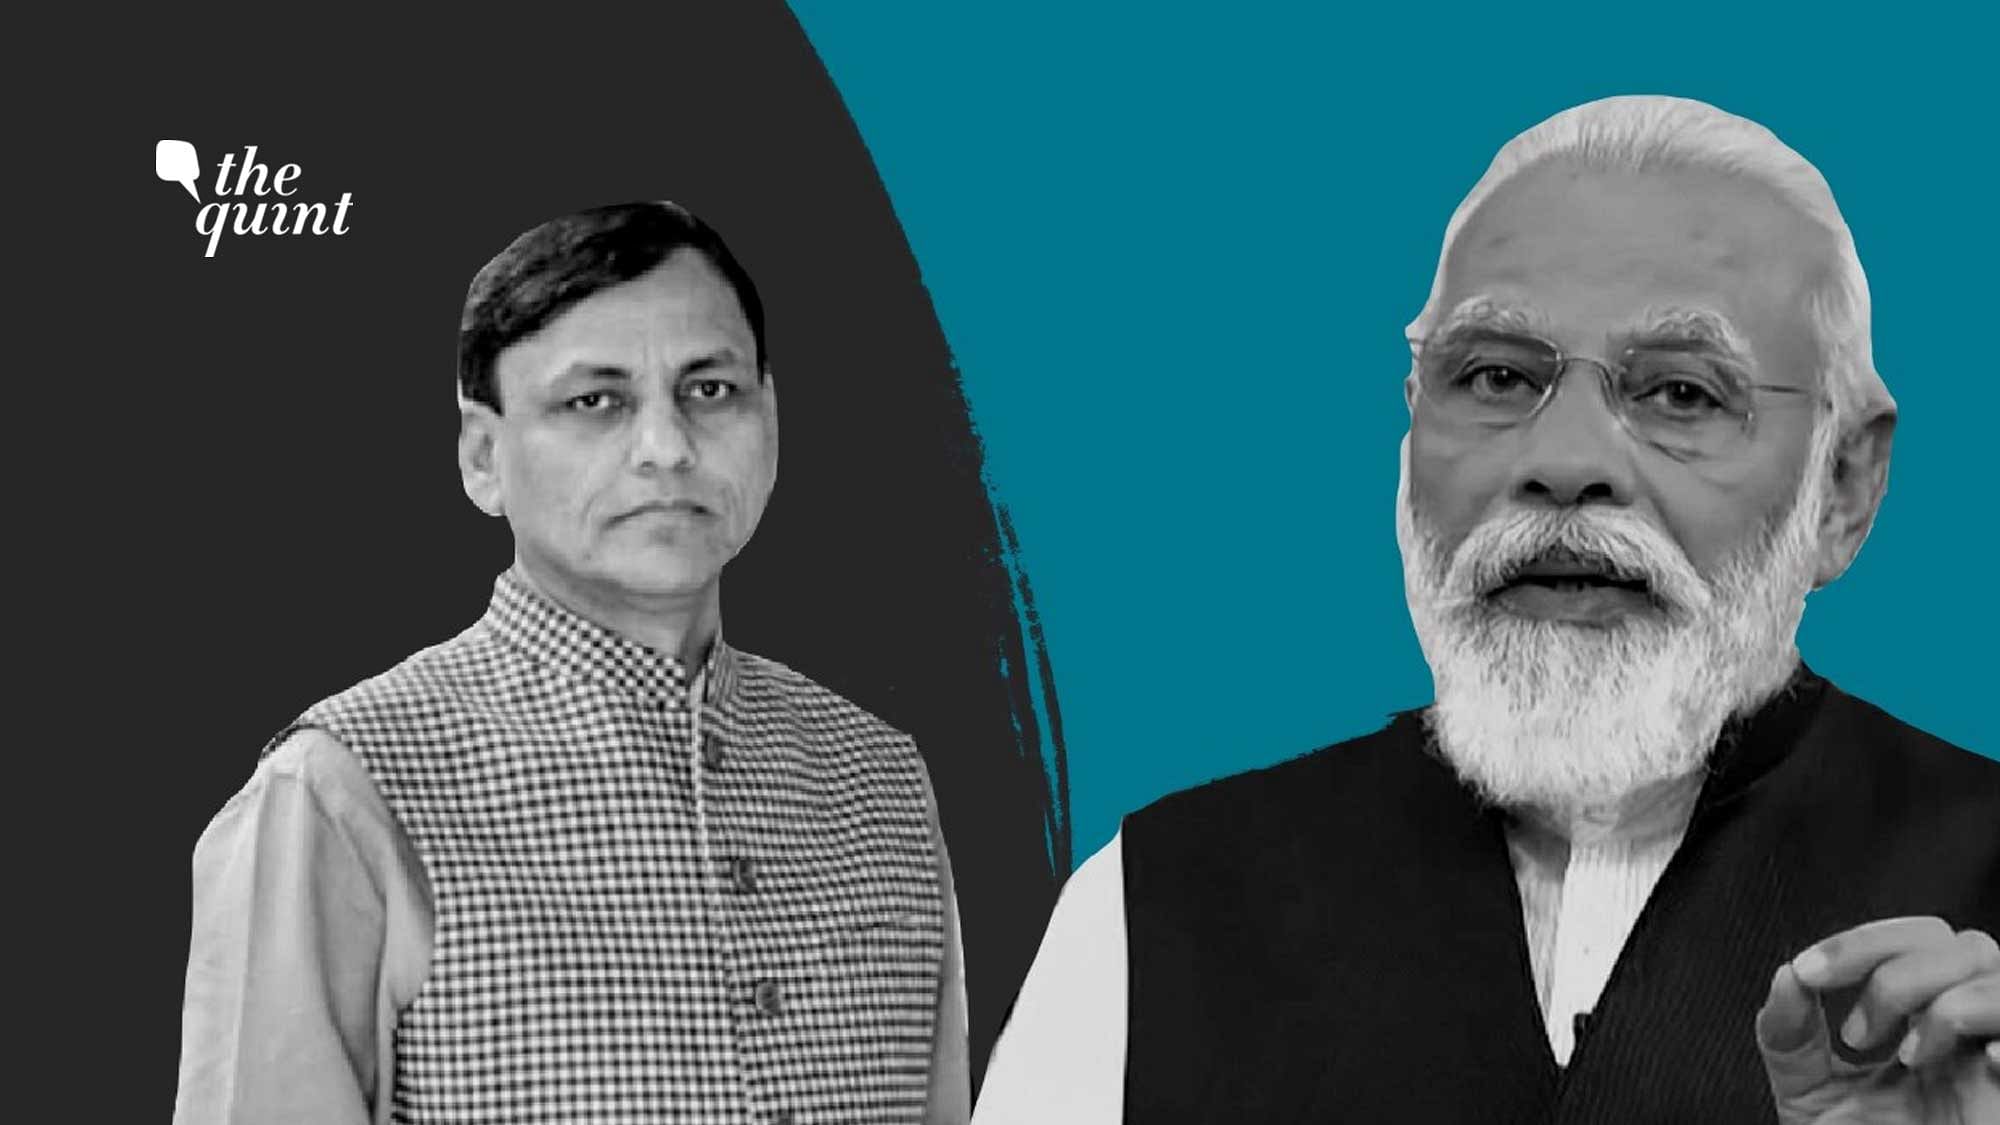 This Bihar election has seen the rise of Nityanand Rai as a prominent BJP face. He has the support of PM Narendra Modi.&nbsp;